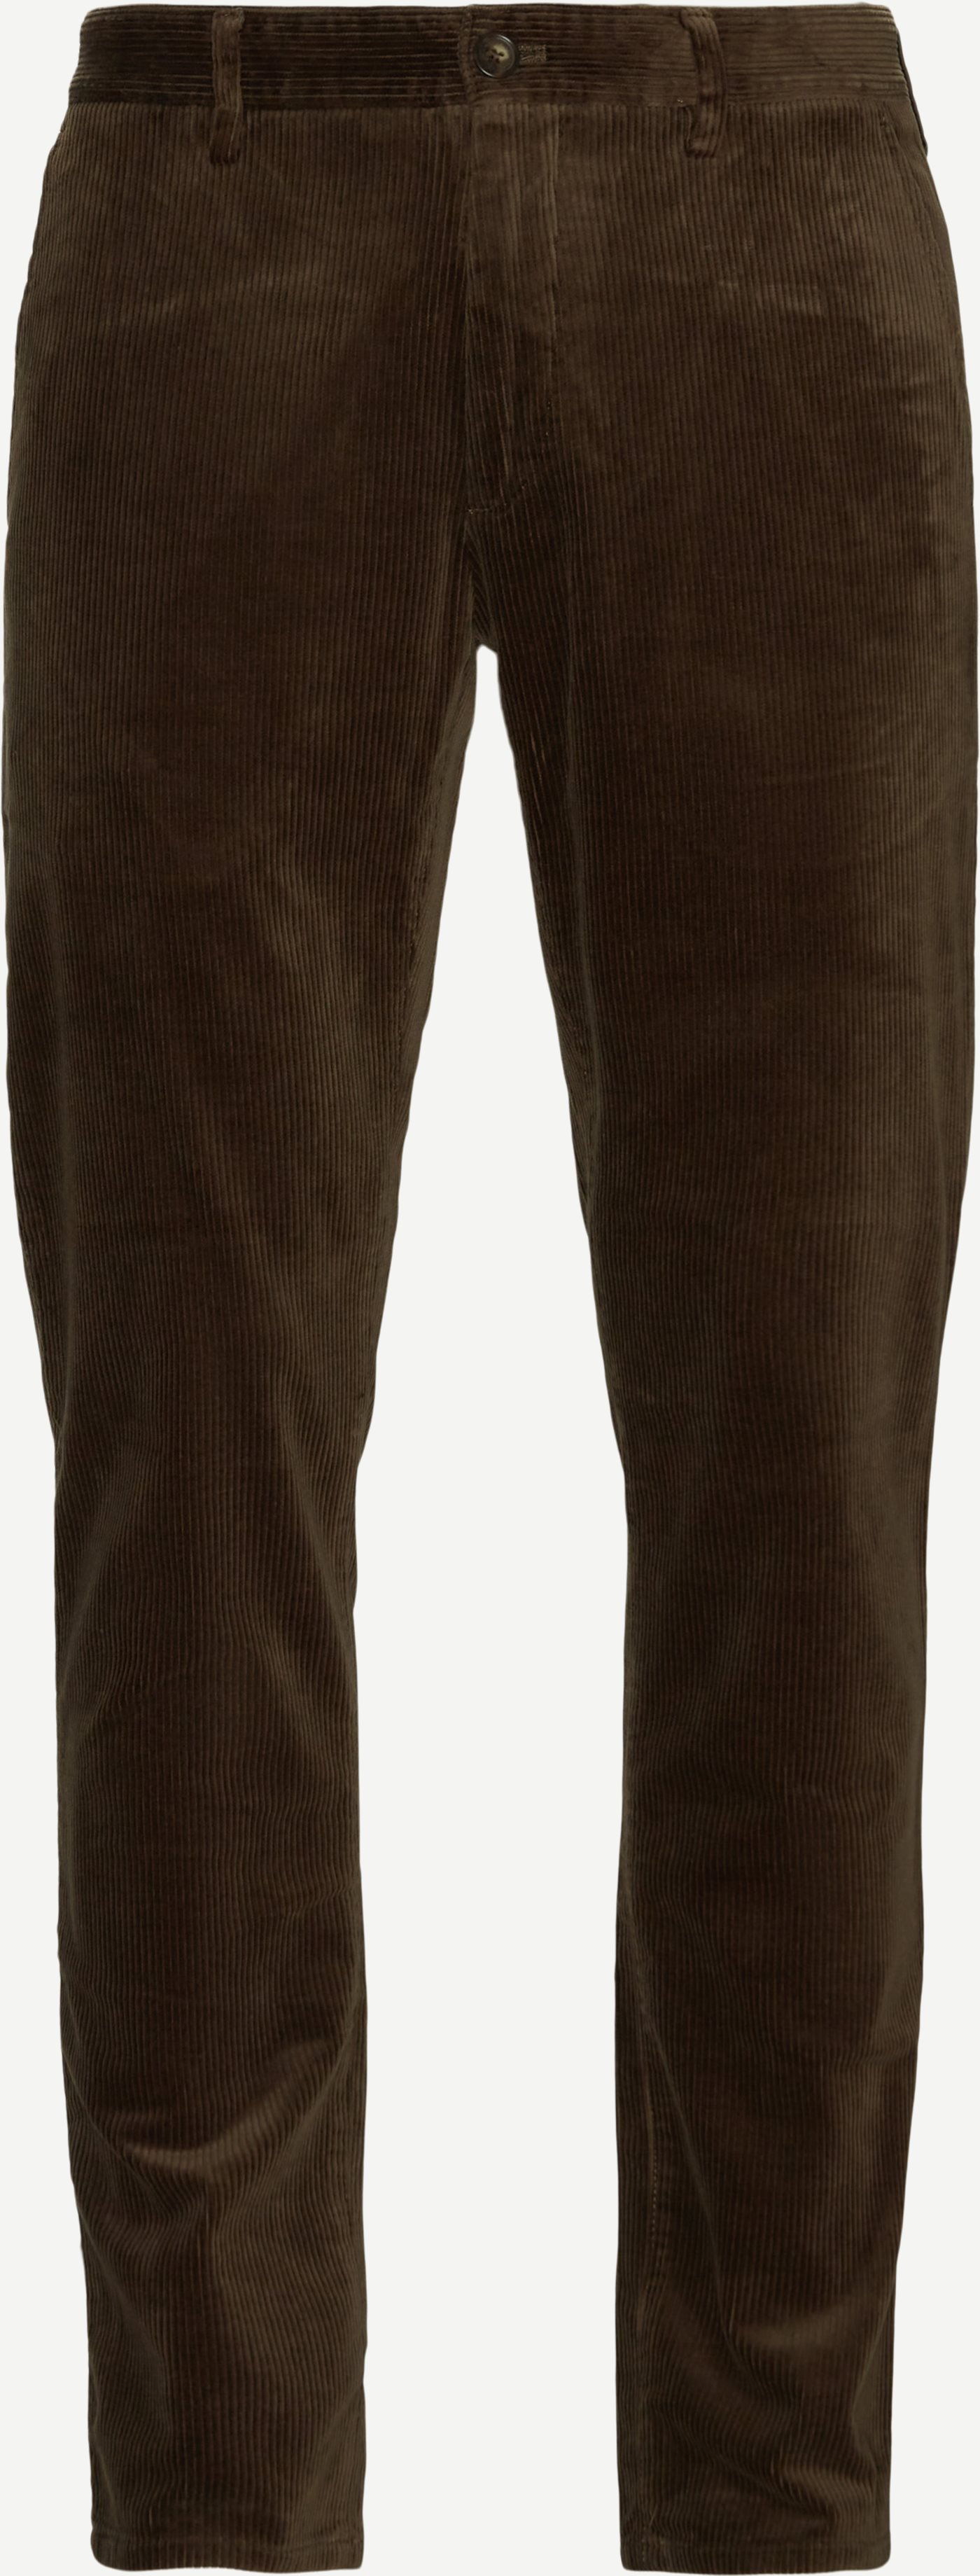 Karl 1322 Velvet Chions - Trousers - Regular fit - Army